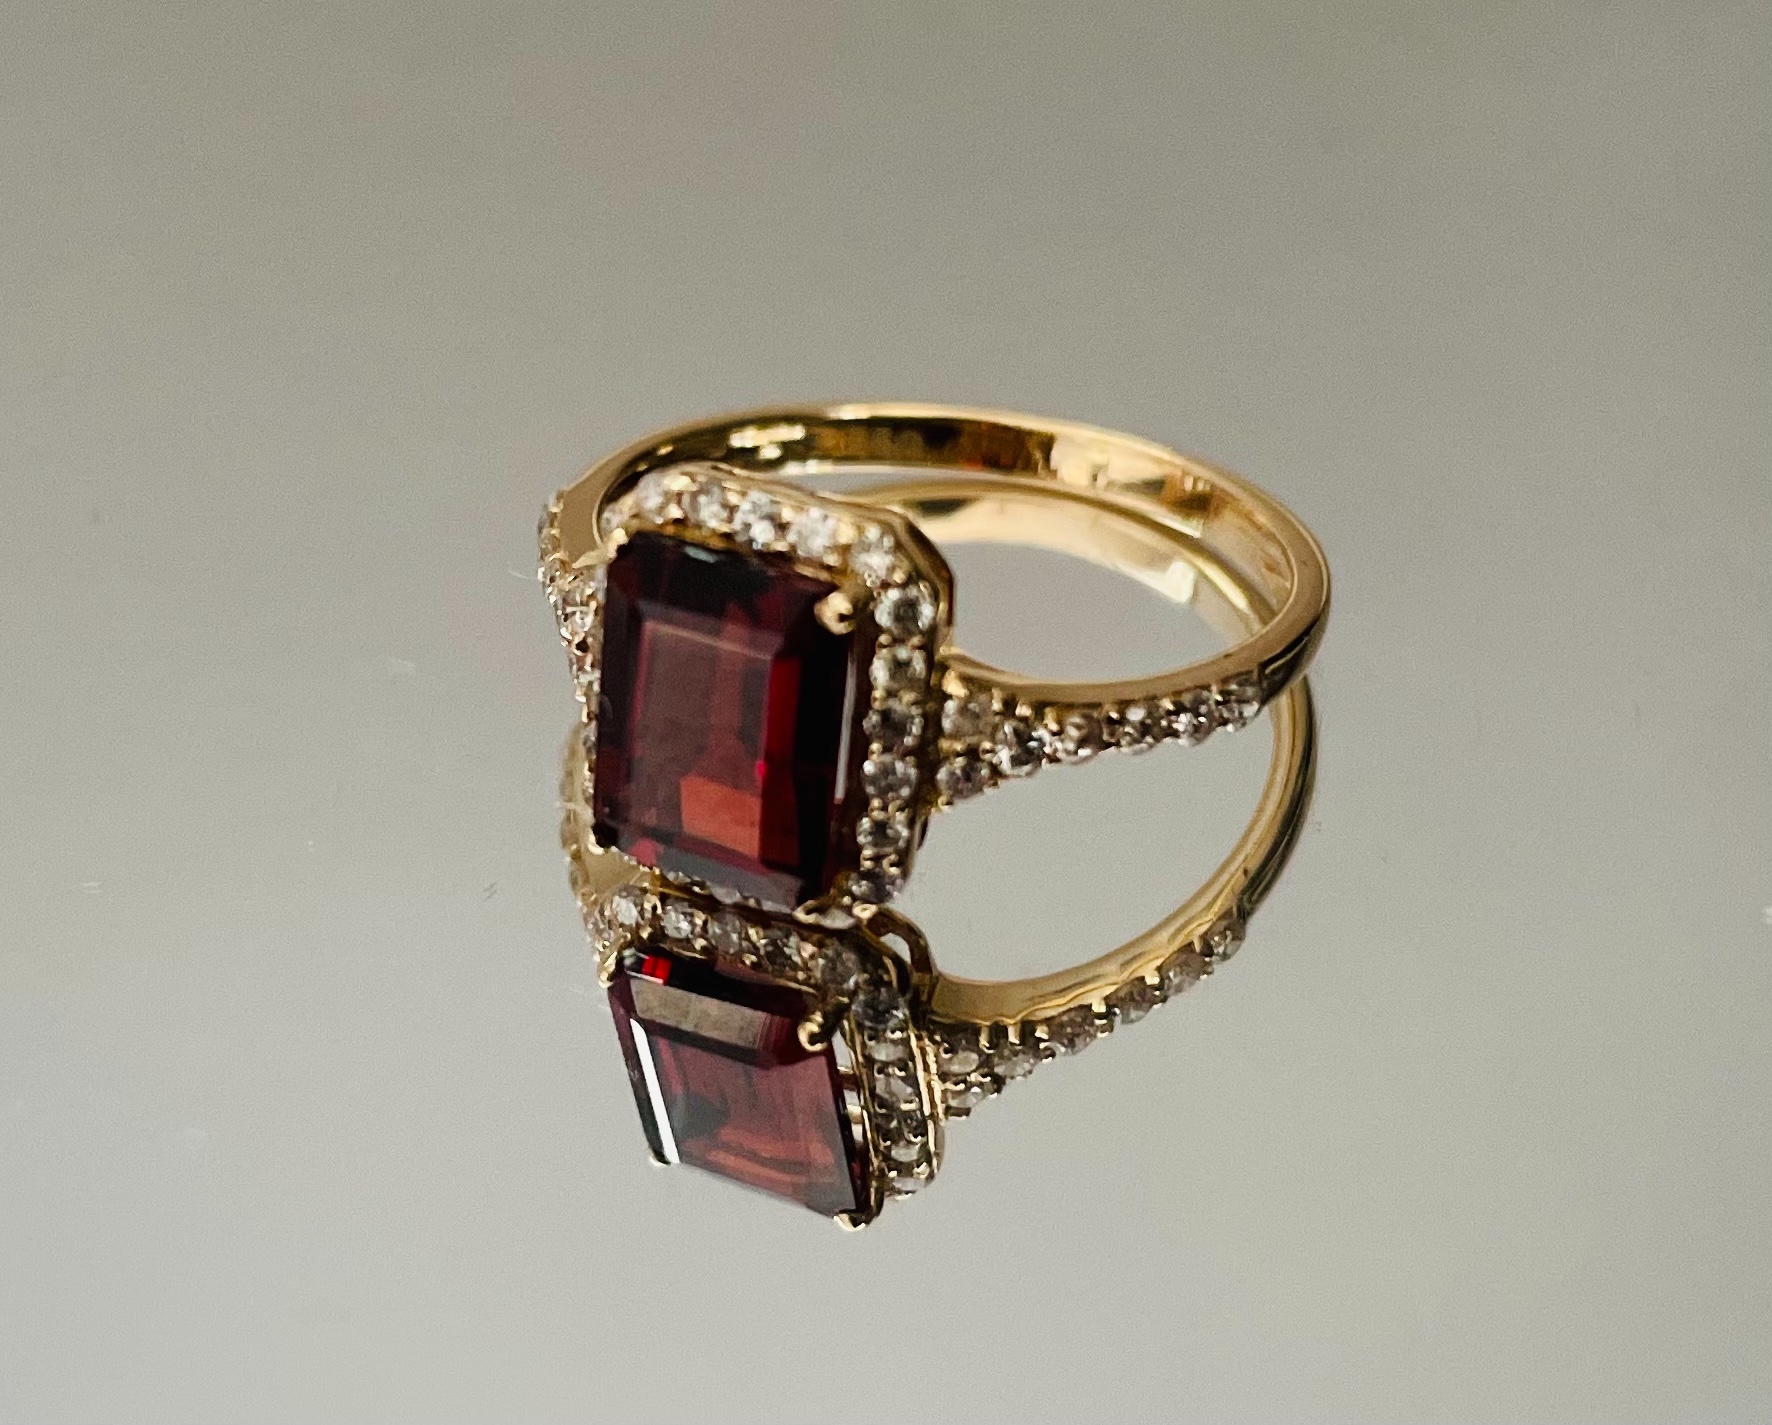 Beautiful Natural Garnet Ring With Diamonds And 18k Gold - Image 8 of 8